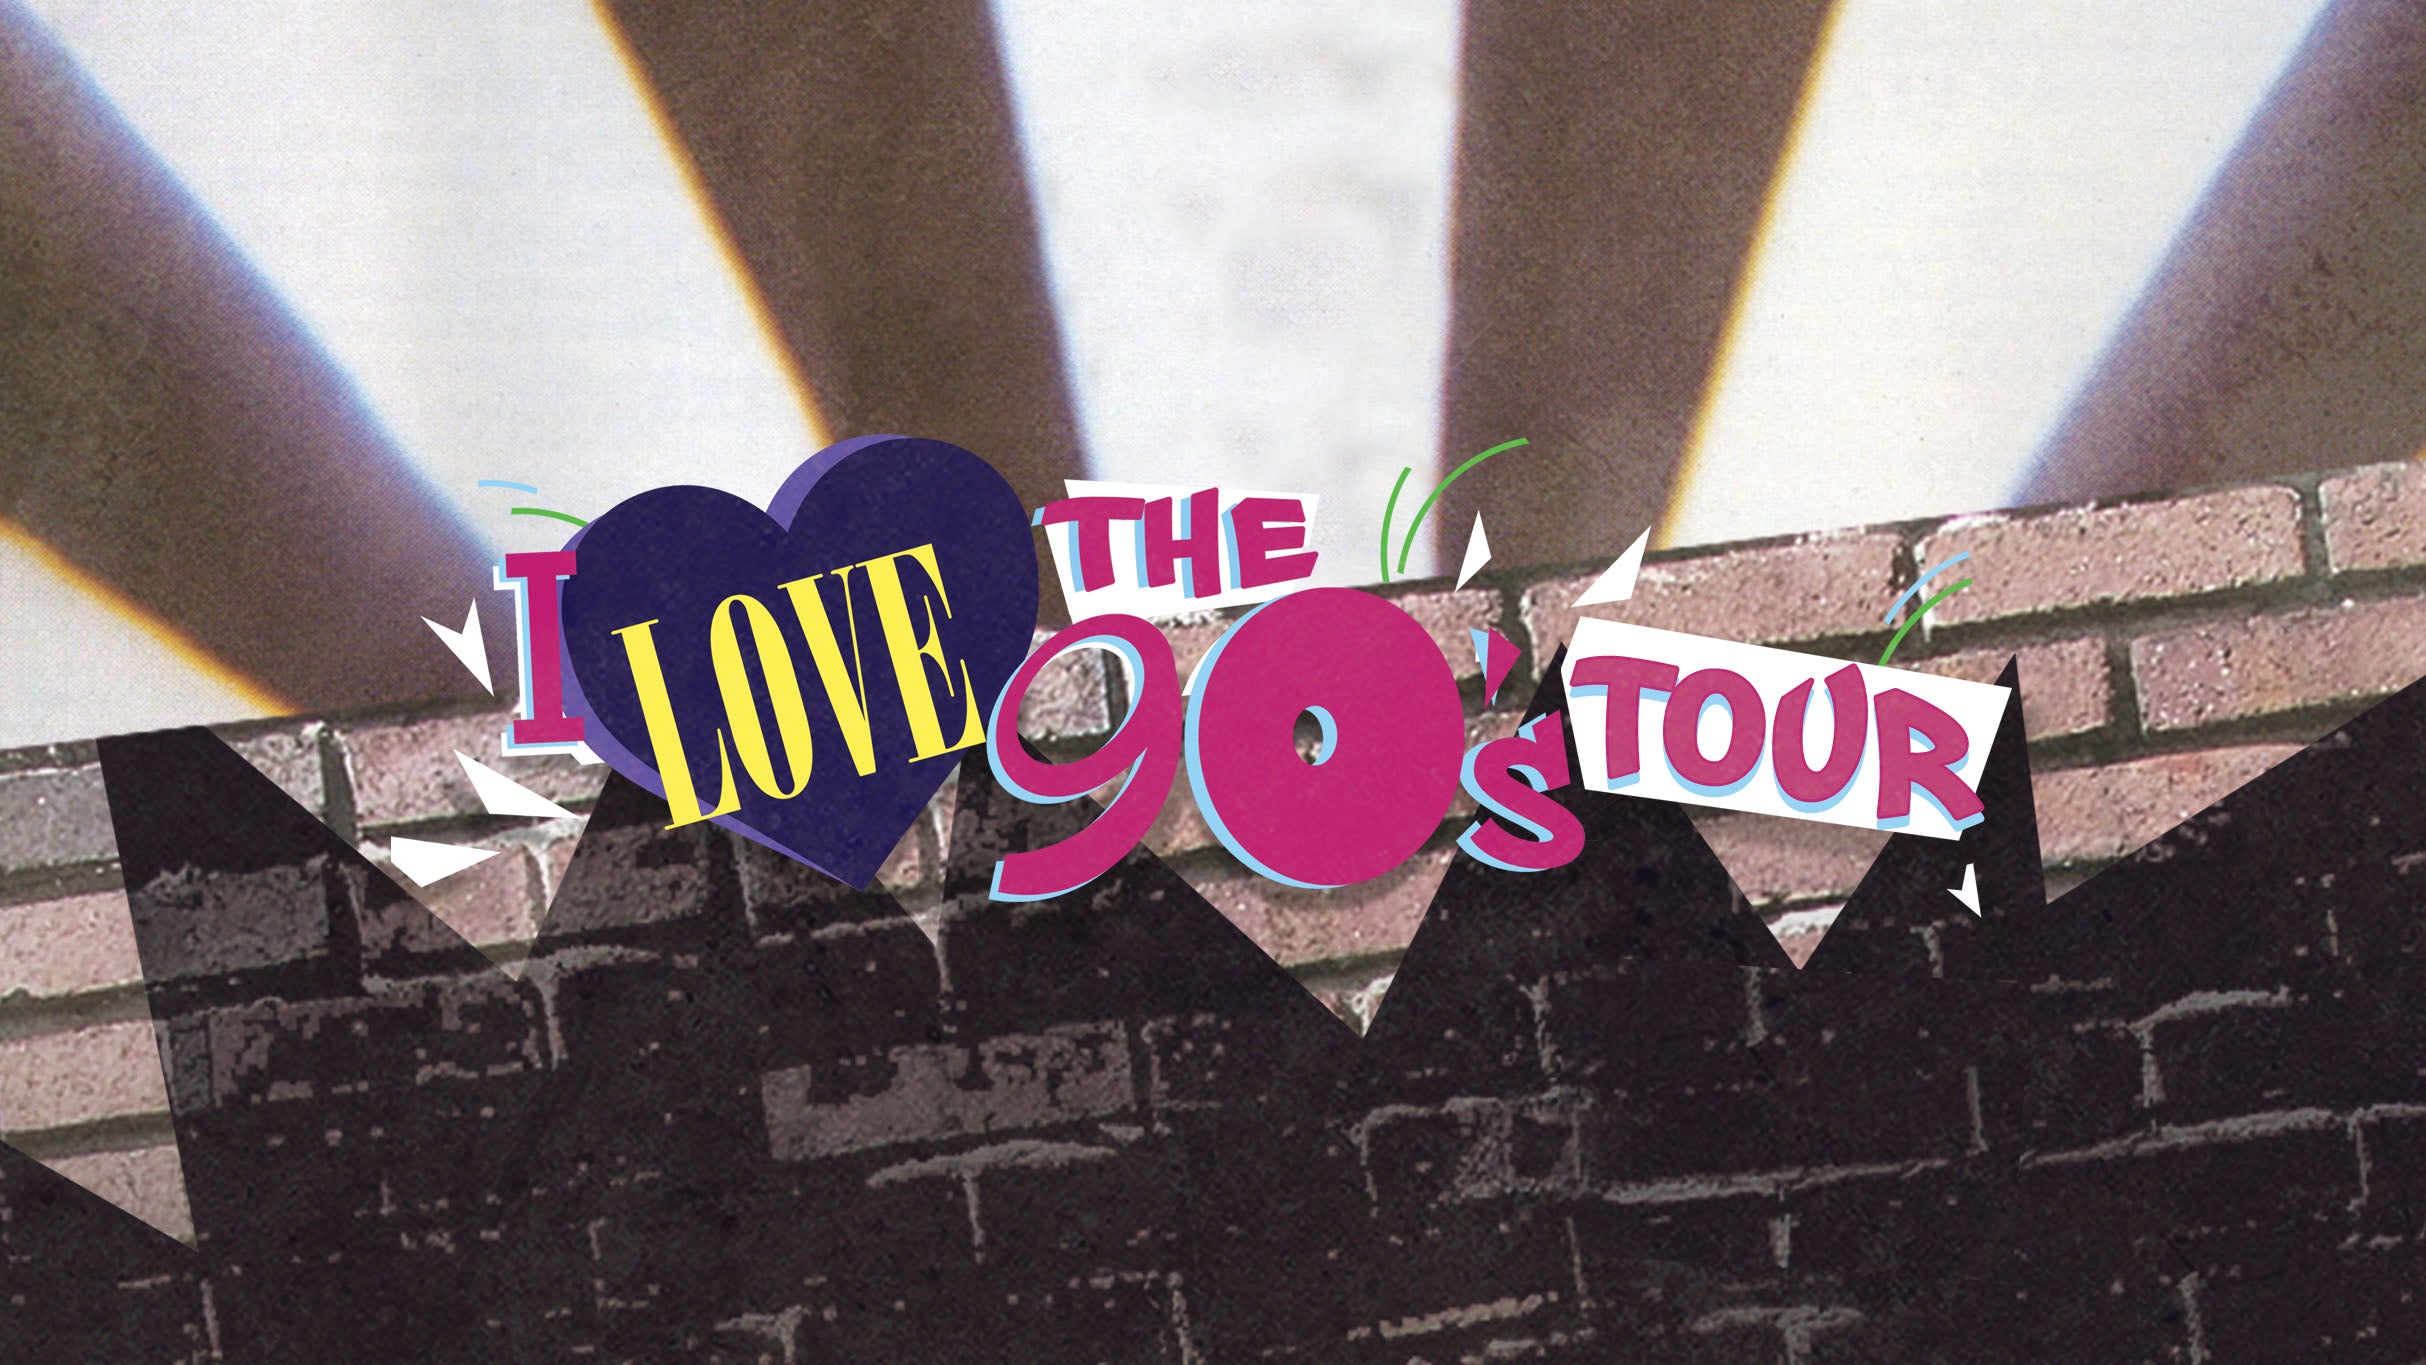 I Love The 90's Tour presale code for show tickets in Primm, NV (Star Of The Desert Arena at Primm Valley Resorts)